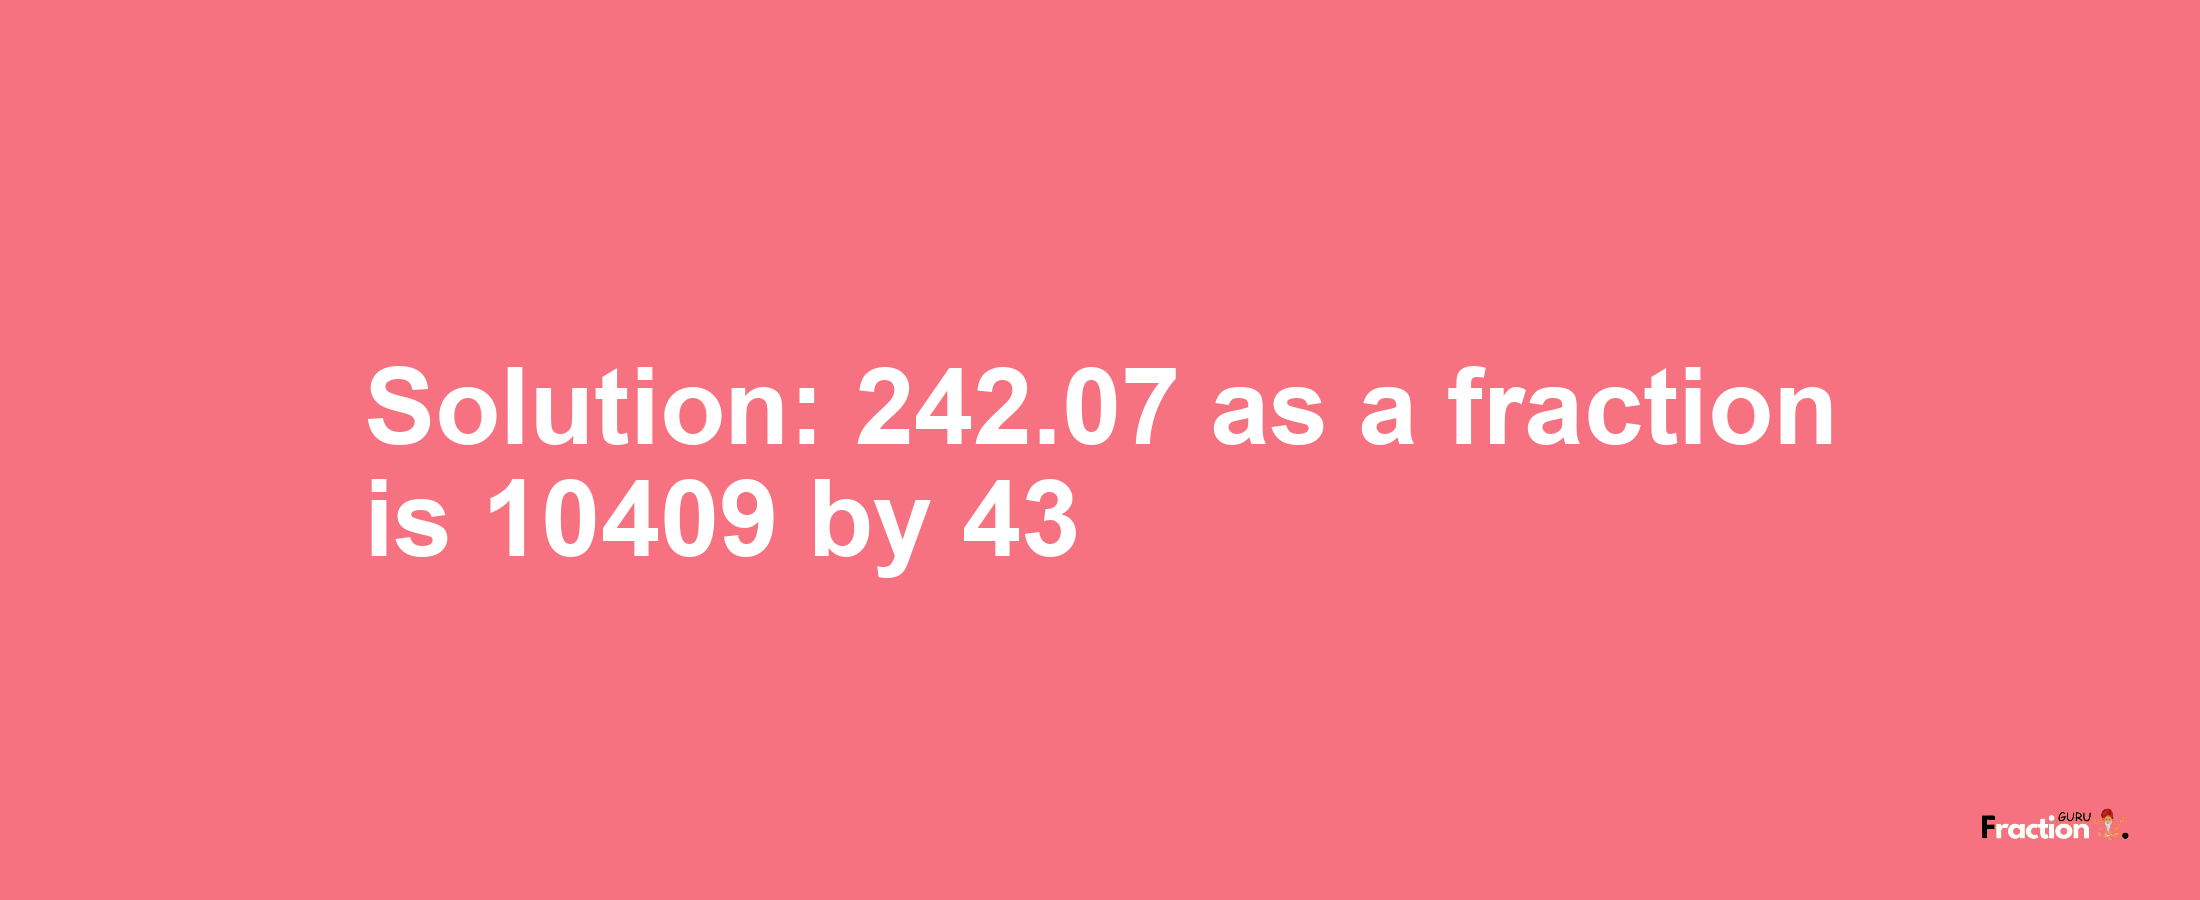 Solution:242.07 as a fraction is 10409/43